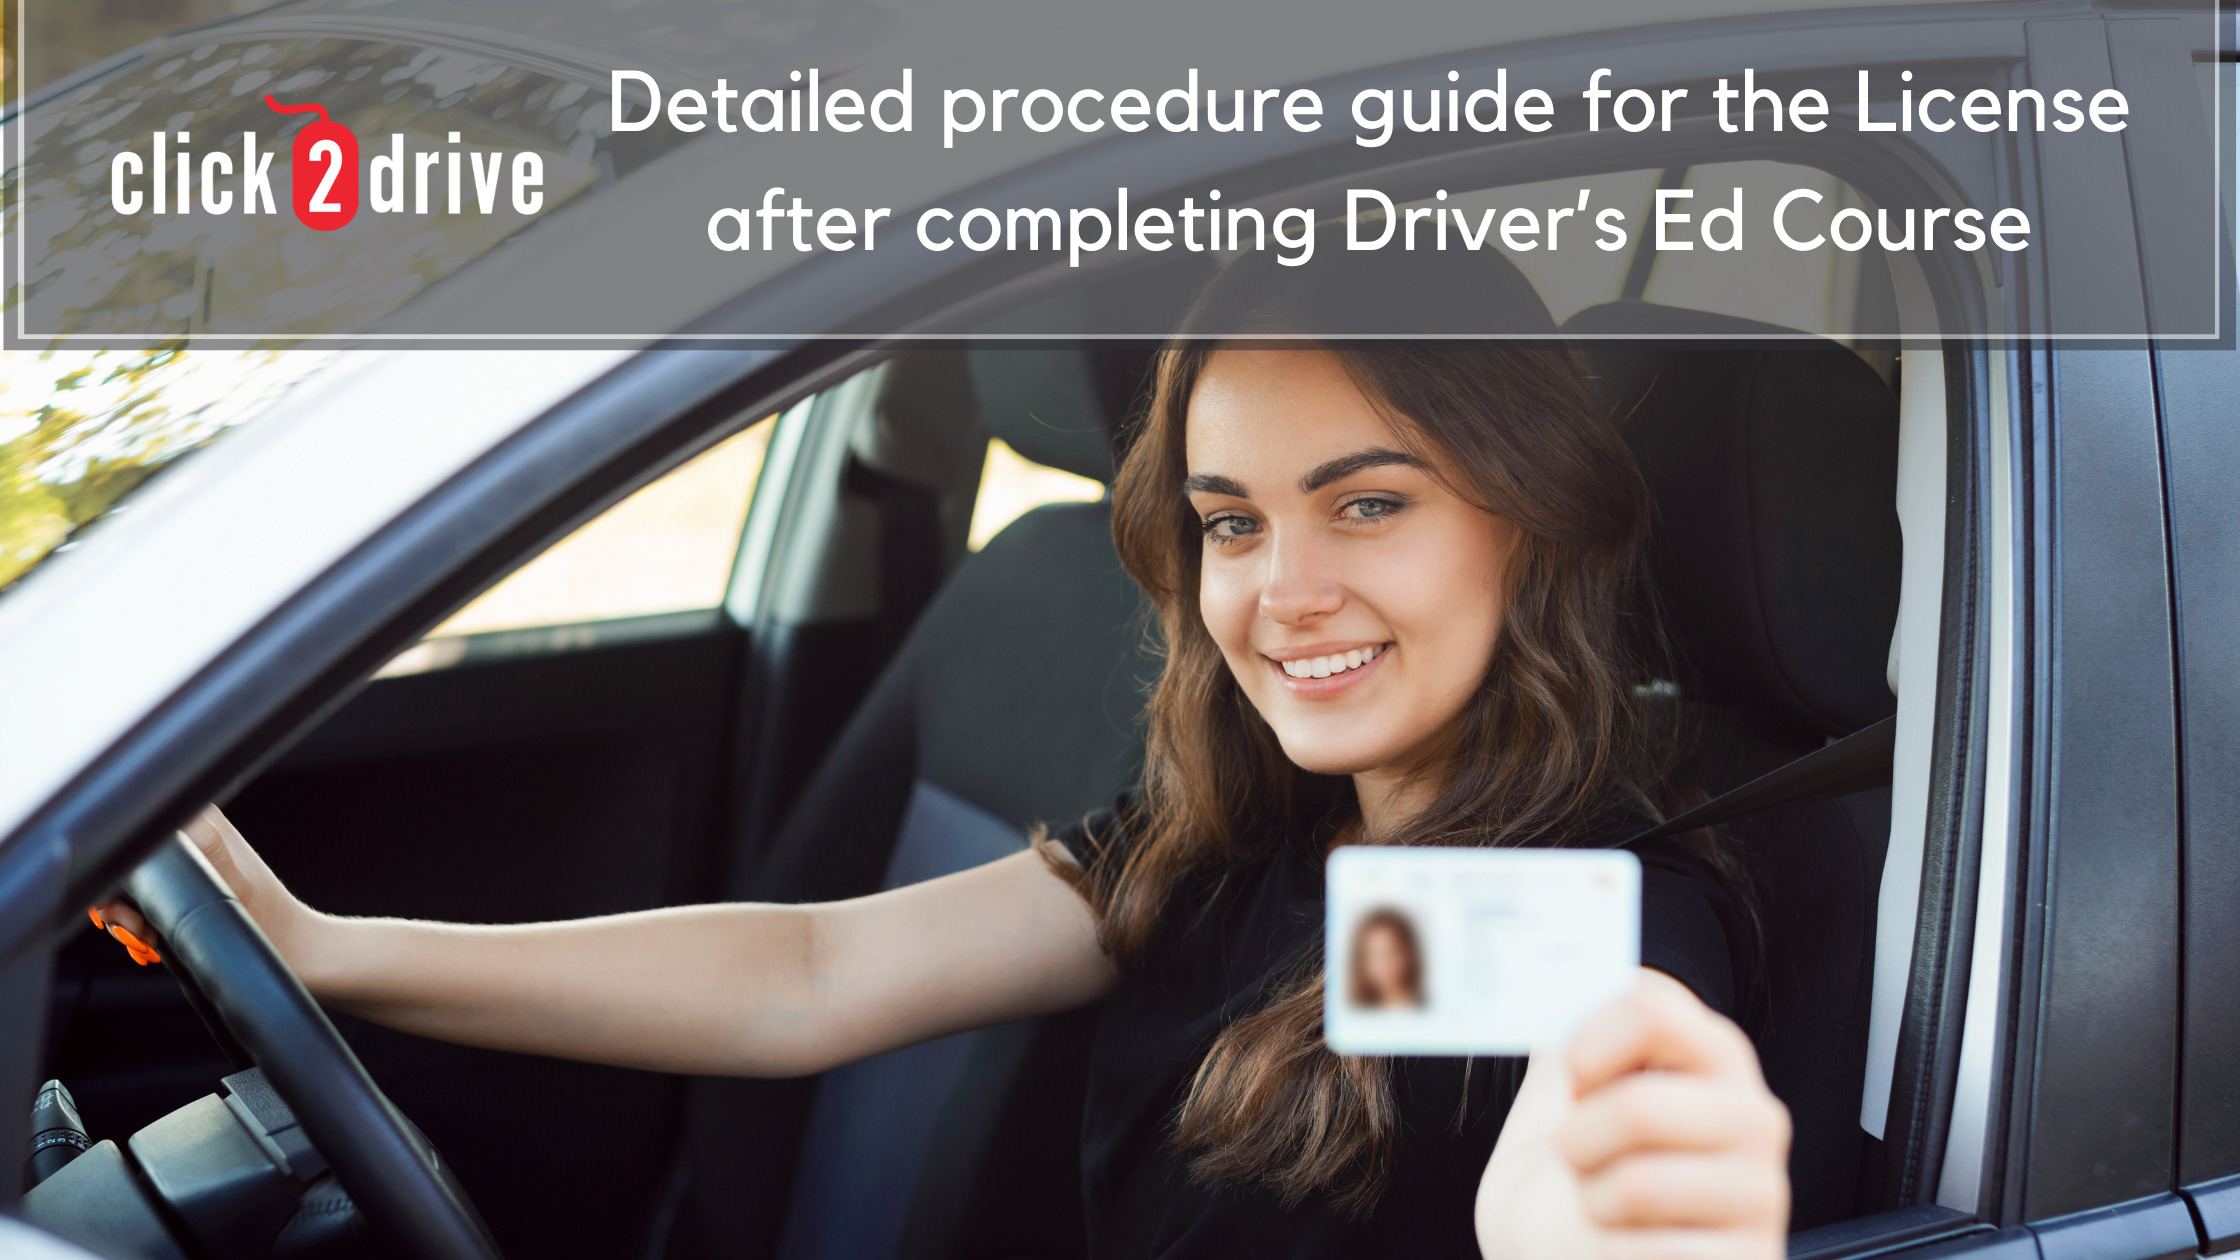 Detailed procedure guide for the license after completing driver’s ed classes